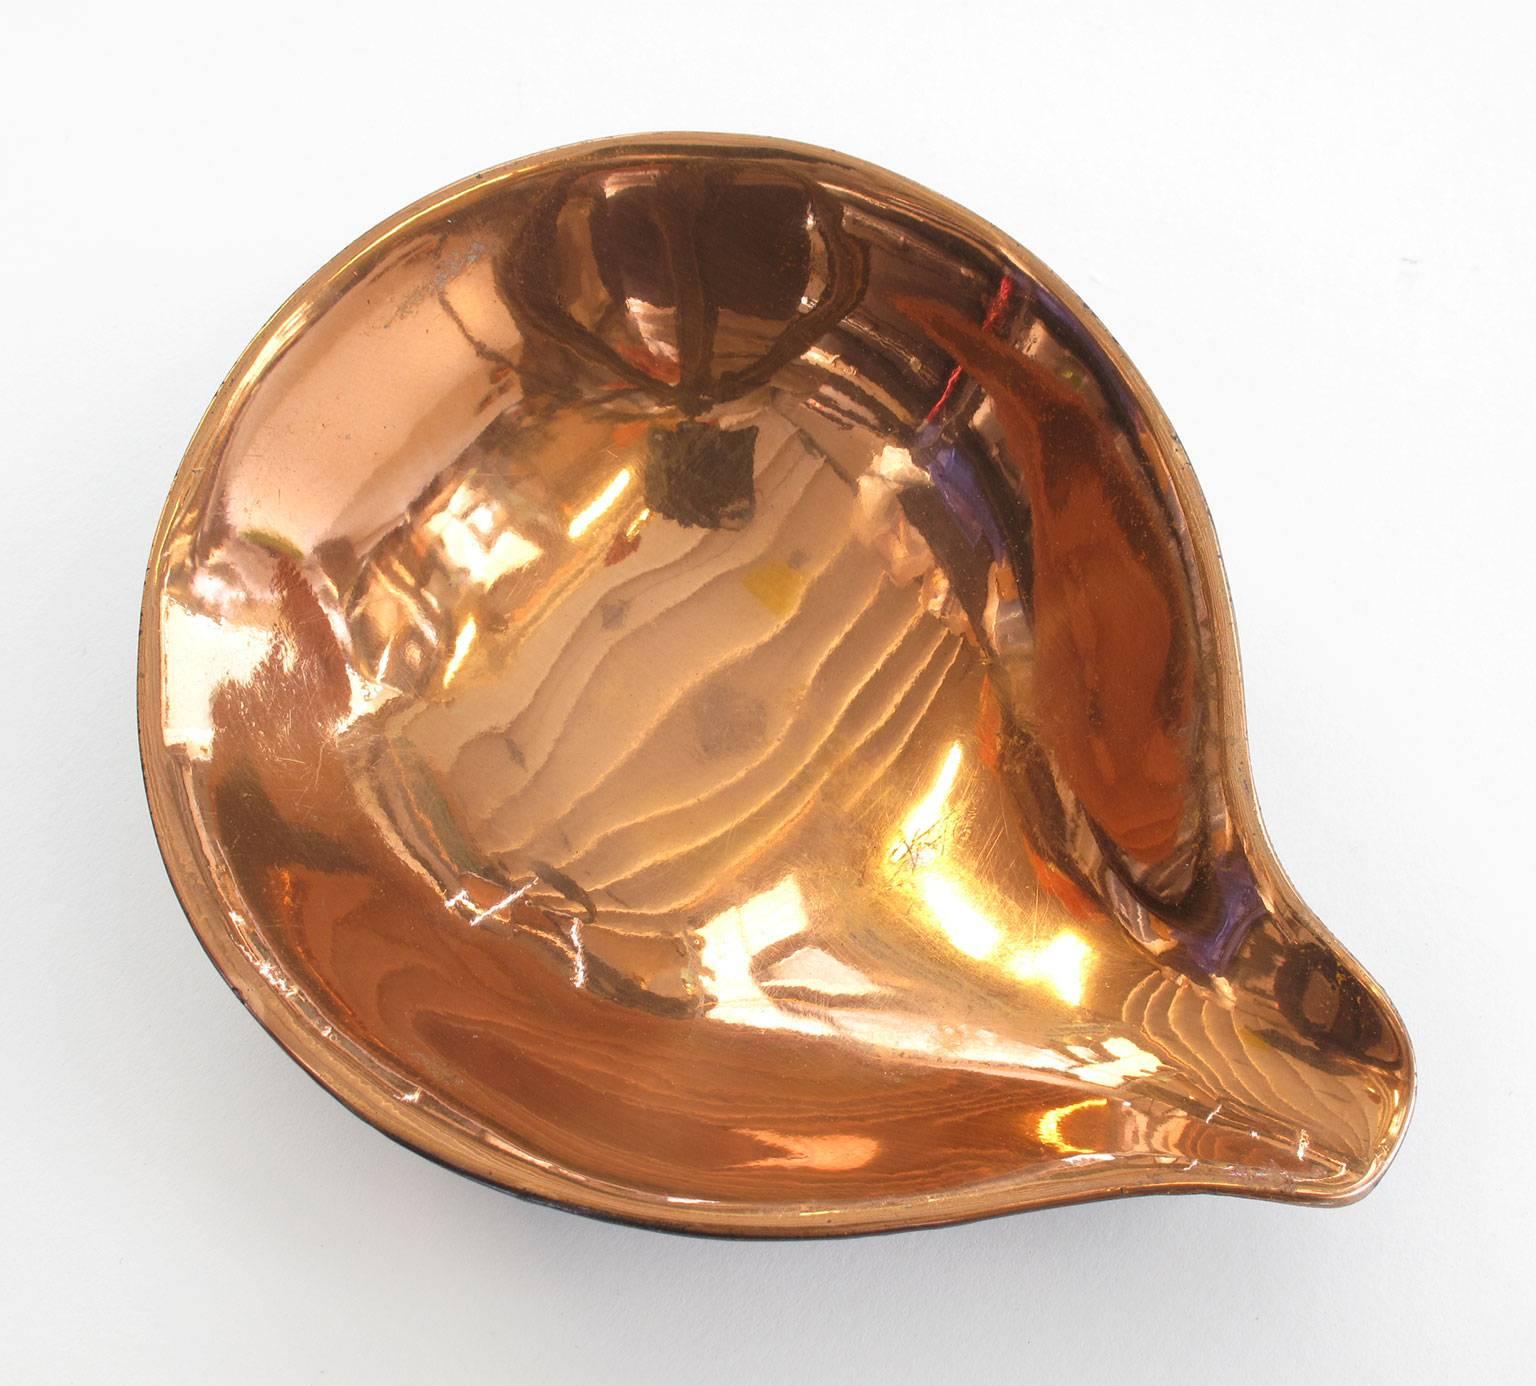 Set of Three Ben Seibel Biomorphic Copper Nesting Objects, 1950s For Sale 2